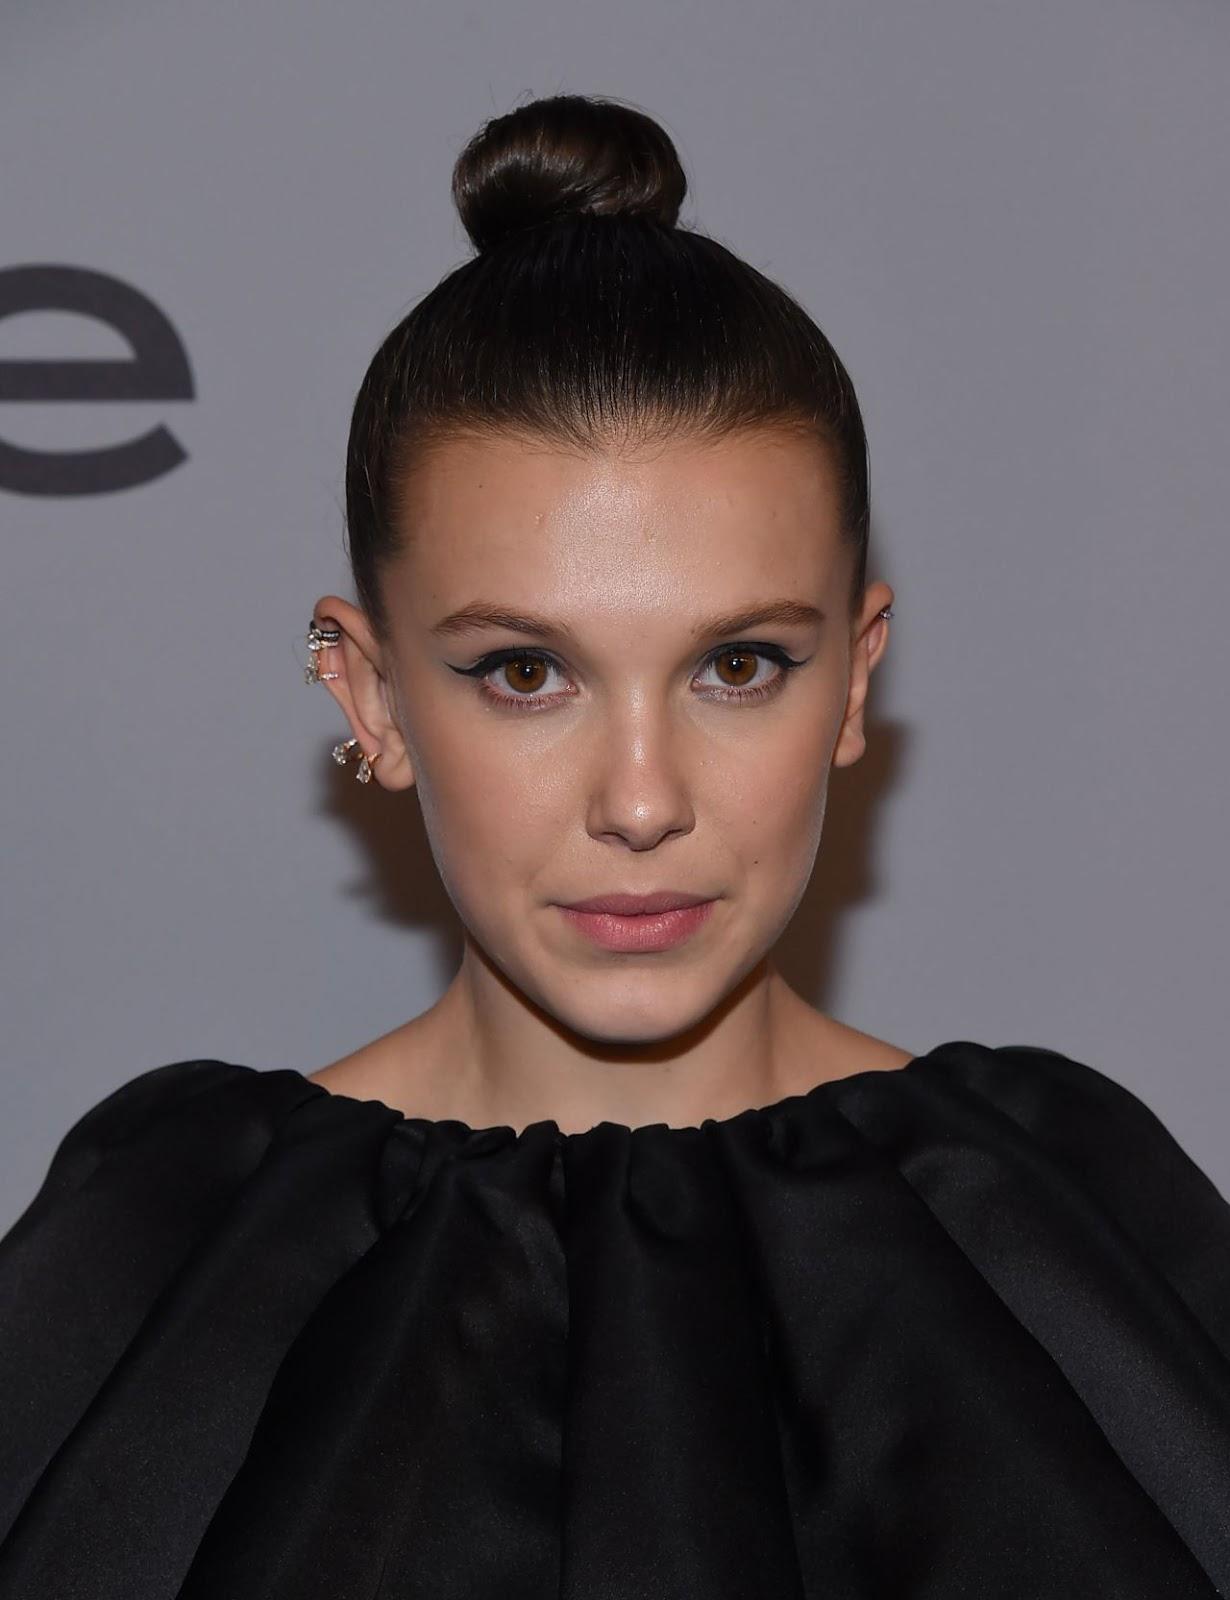 Millie Bobby Brown Wallpaper High Quality